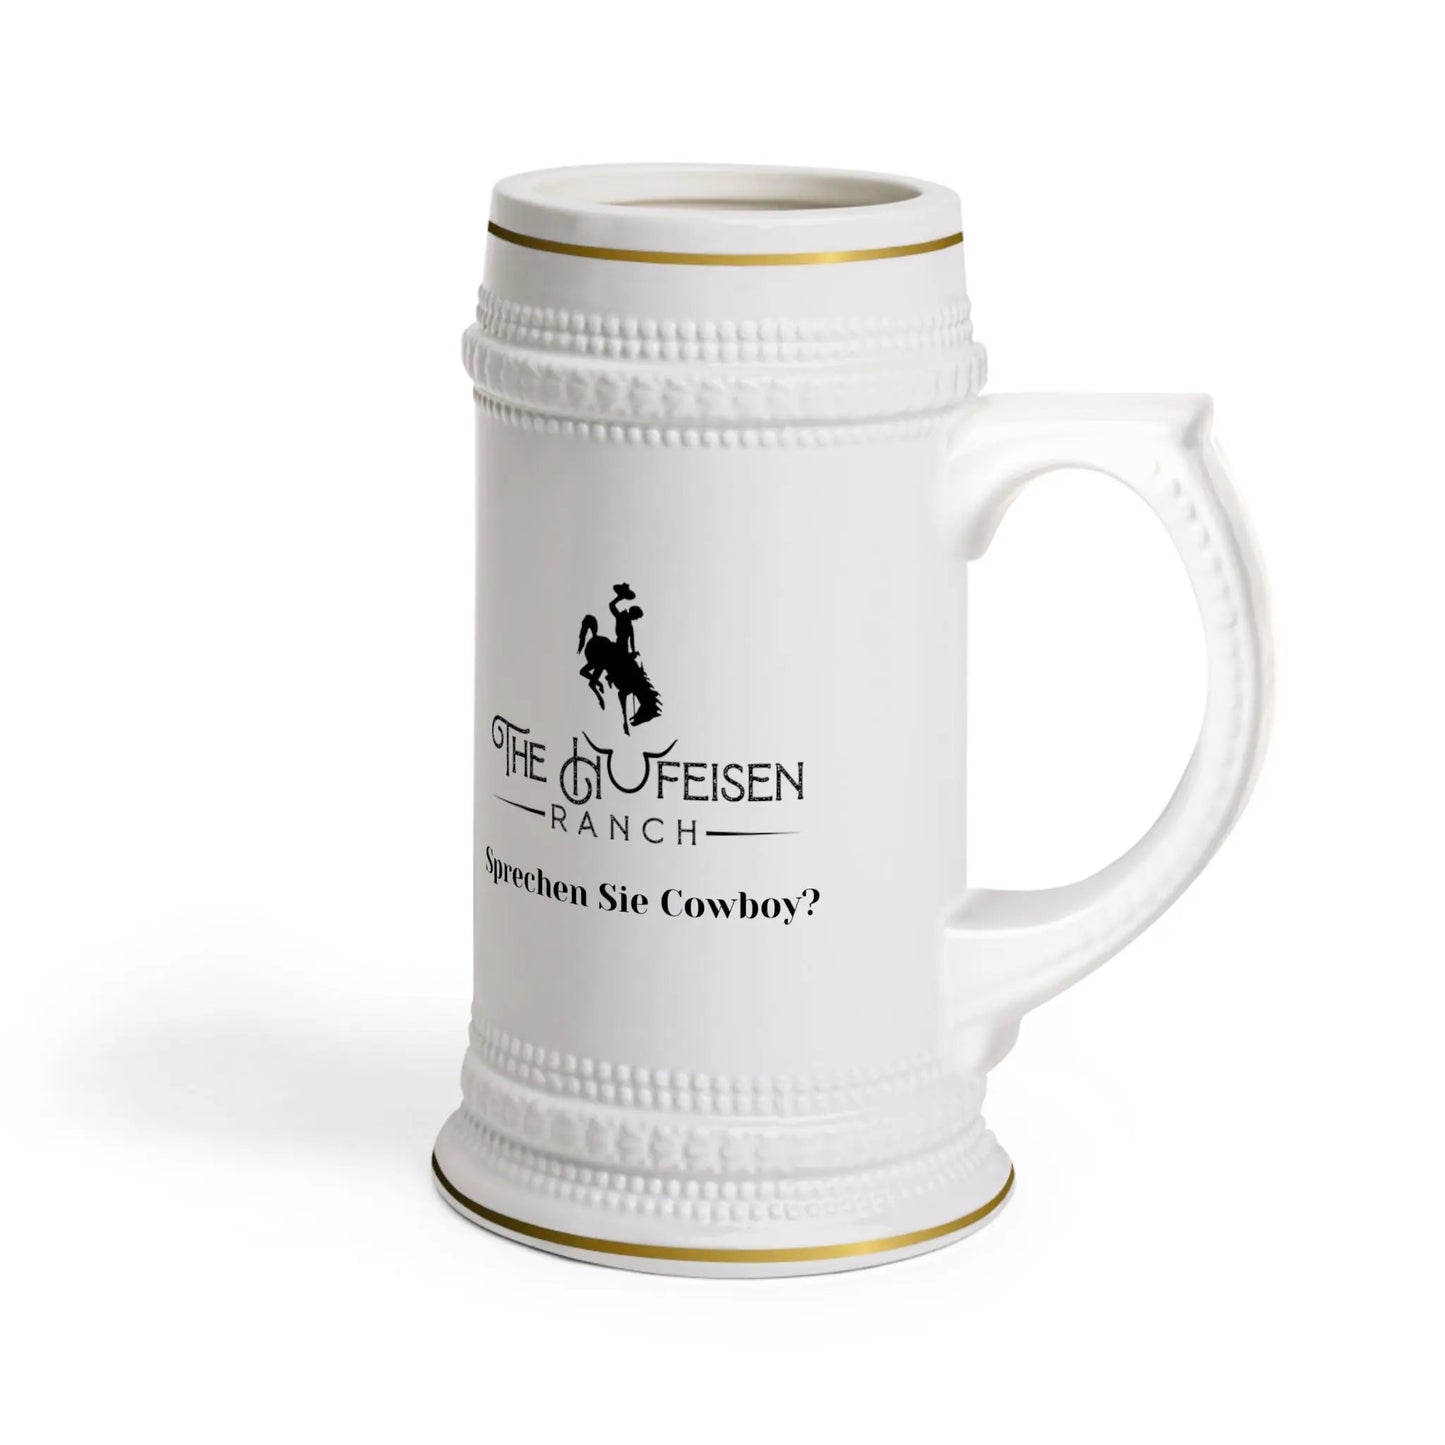 Sprechen Sie Cowboy Beer Stein MugRaise your stein and tip your hat to a unique blend of Old West grit and Bavarian charm with our 'Sprechen Sie Cowboy' Beer Stein. This ruggedly handsome stein bringSprechen Sie Cowboy Beer Stein MugThe Hufeisen-Ranch (WYO Wagyu)Mug